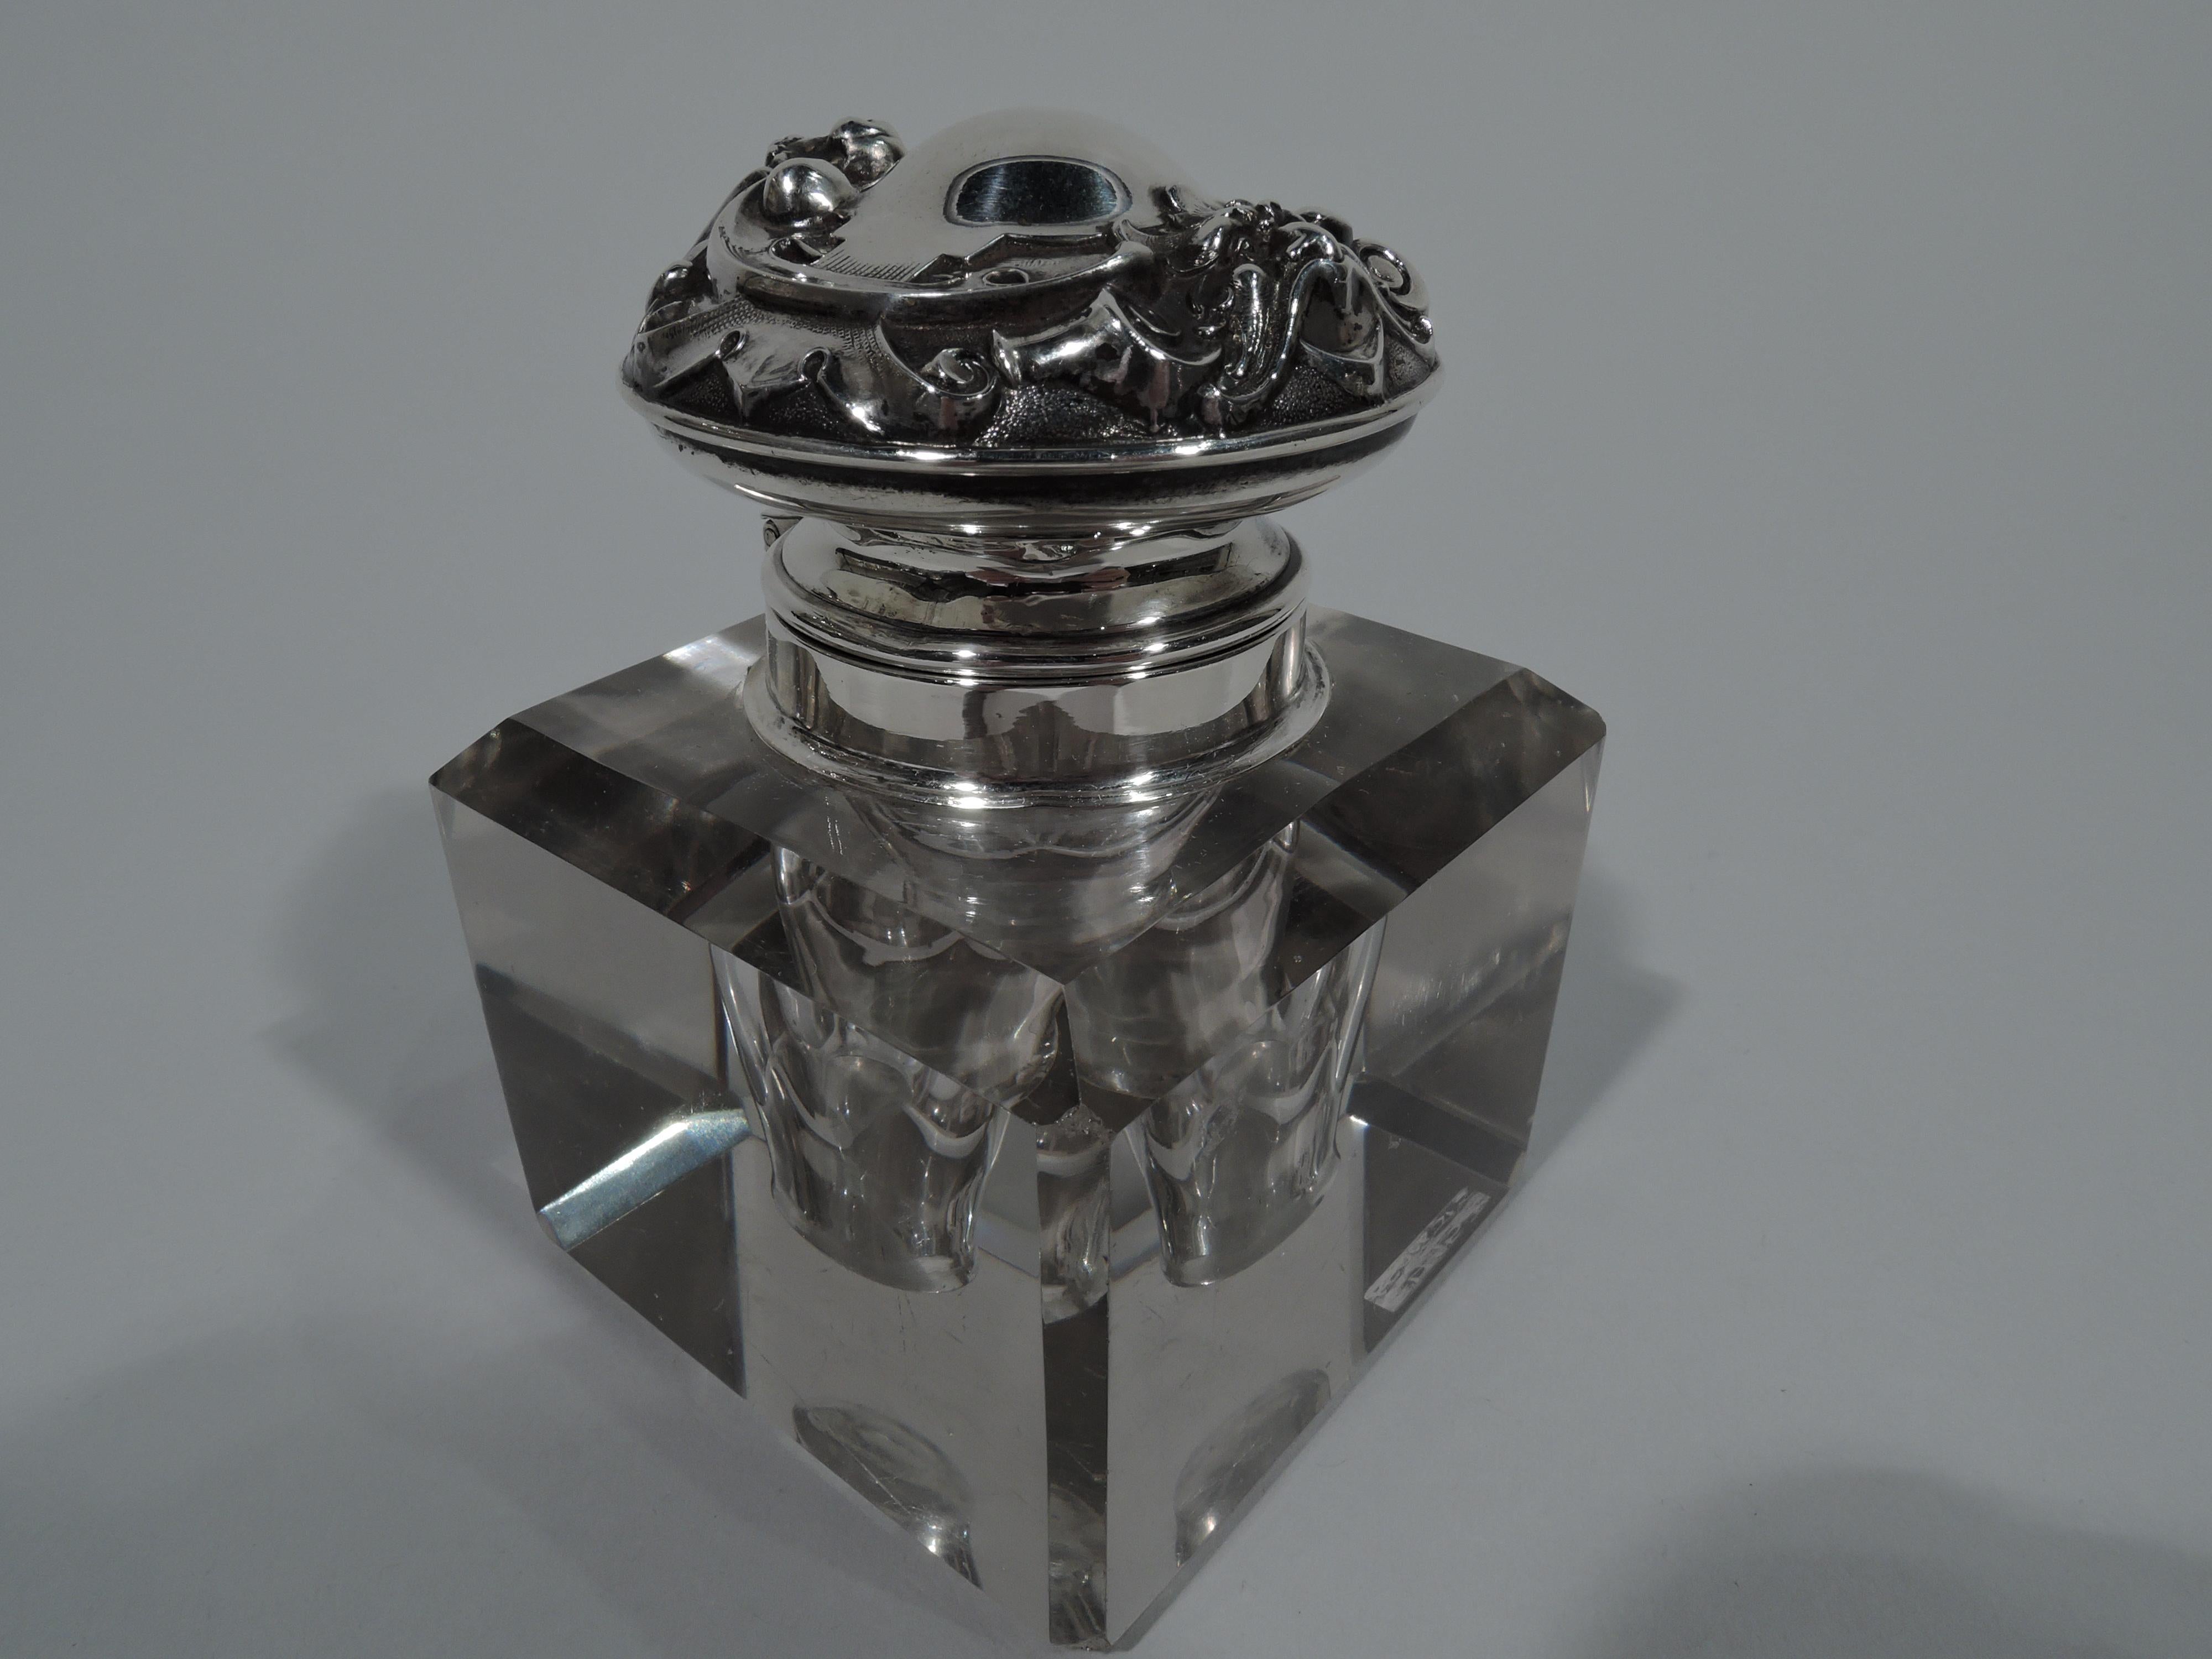 Edwardian sterling silver and cut-glass inkwell. Made by William B. Kerr in Newark, circa 1900. Clear glass rectangular block with faceted shoulder and corners. Ovoid well with short neck in sterling silver collar with hinged cover. Cover top has